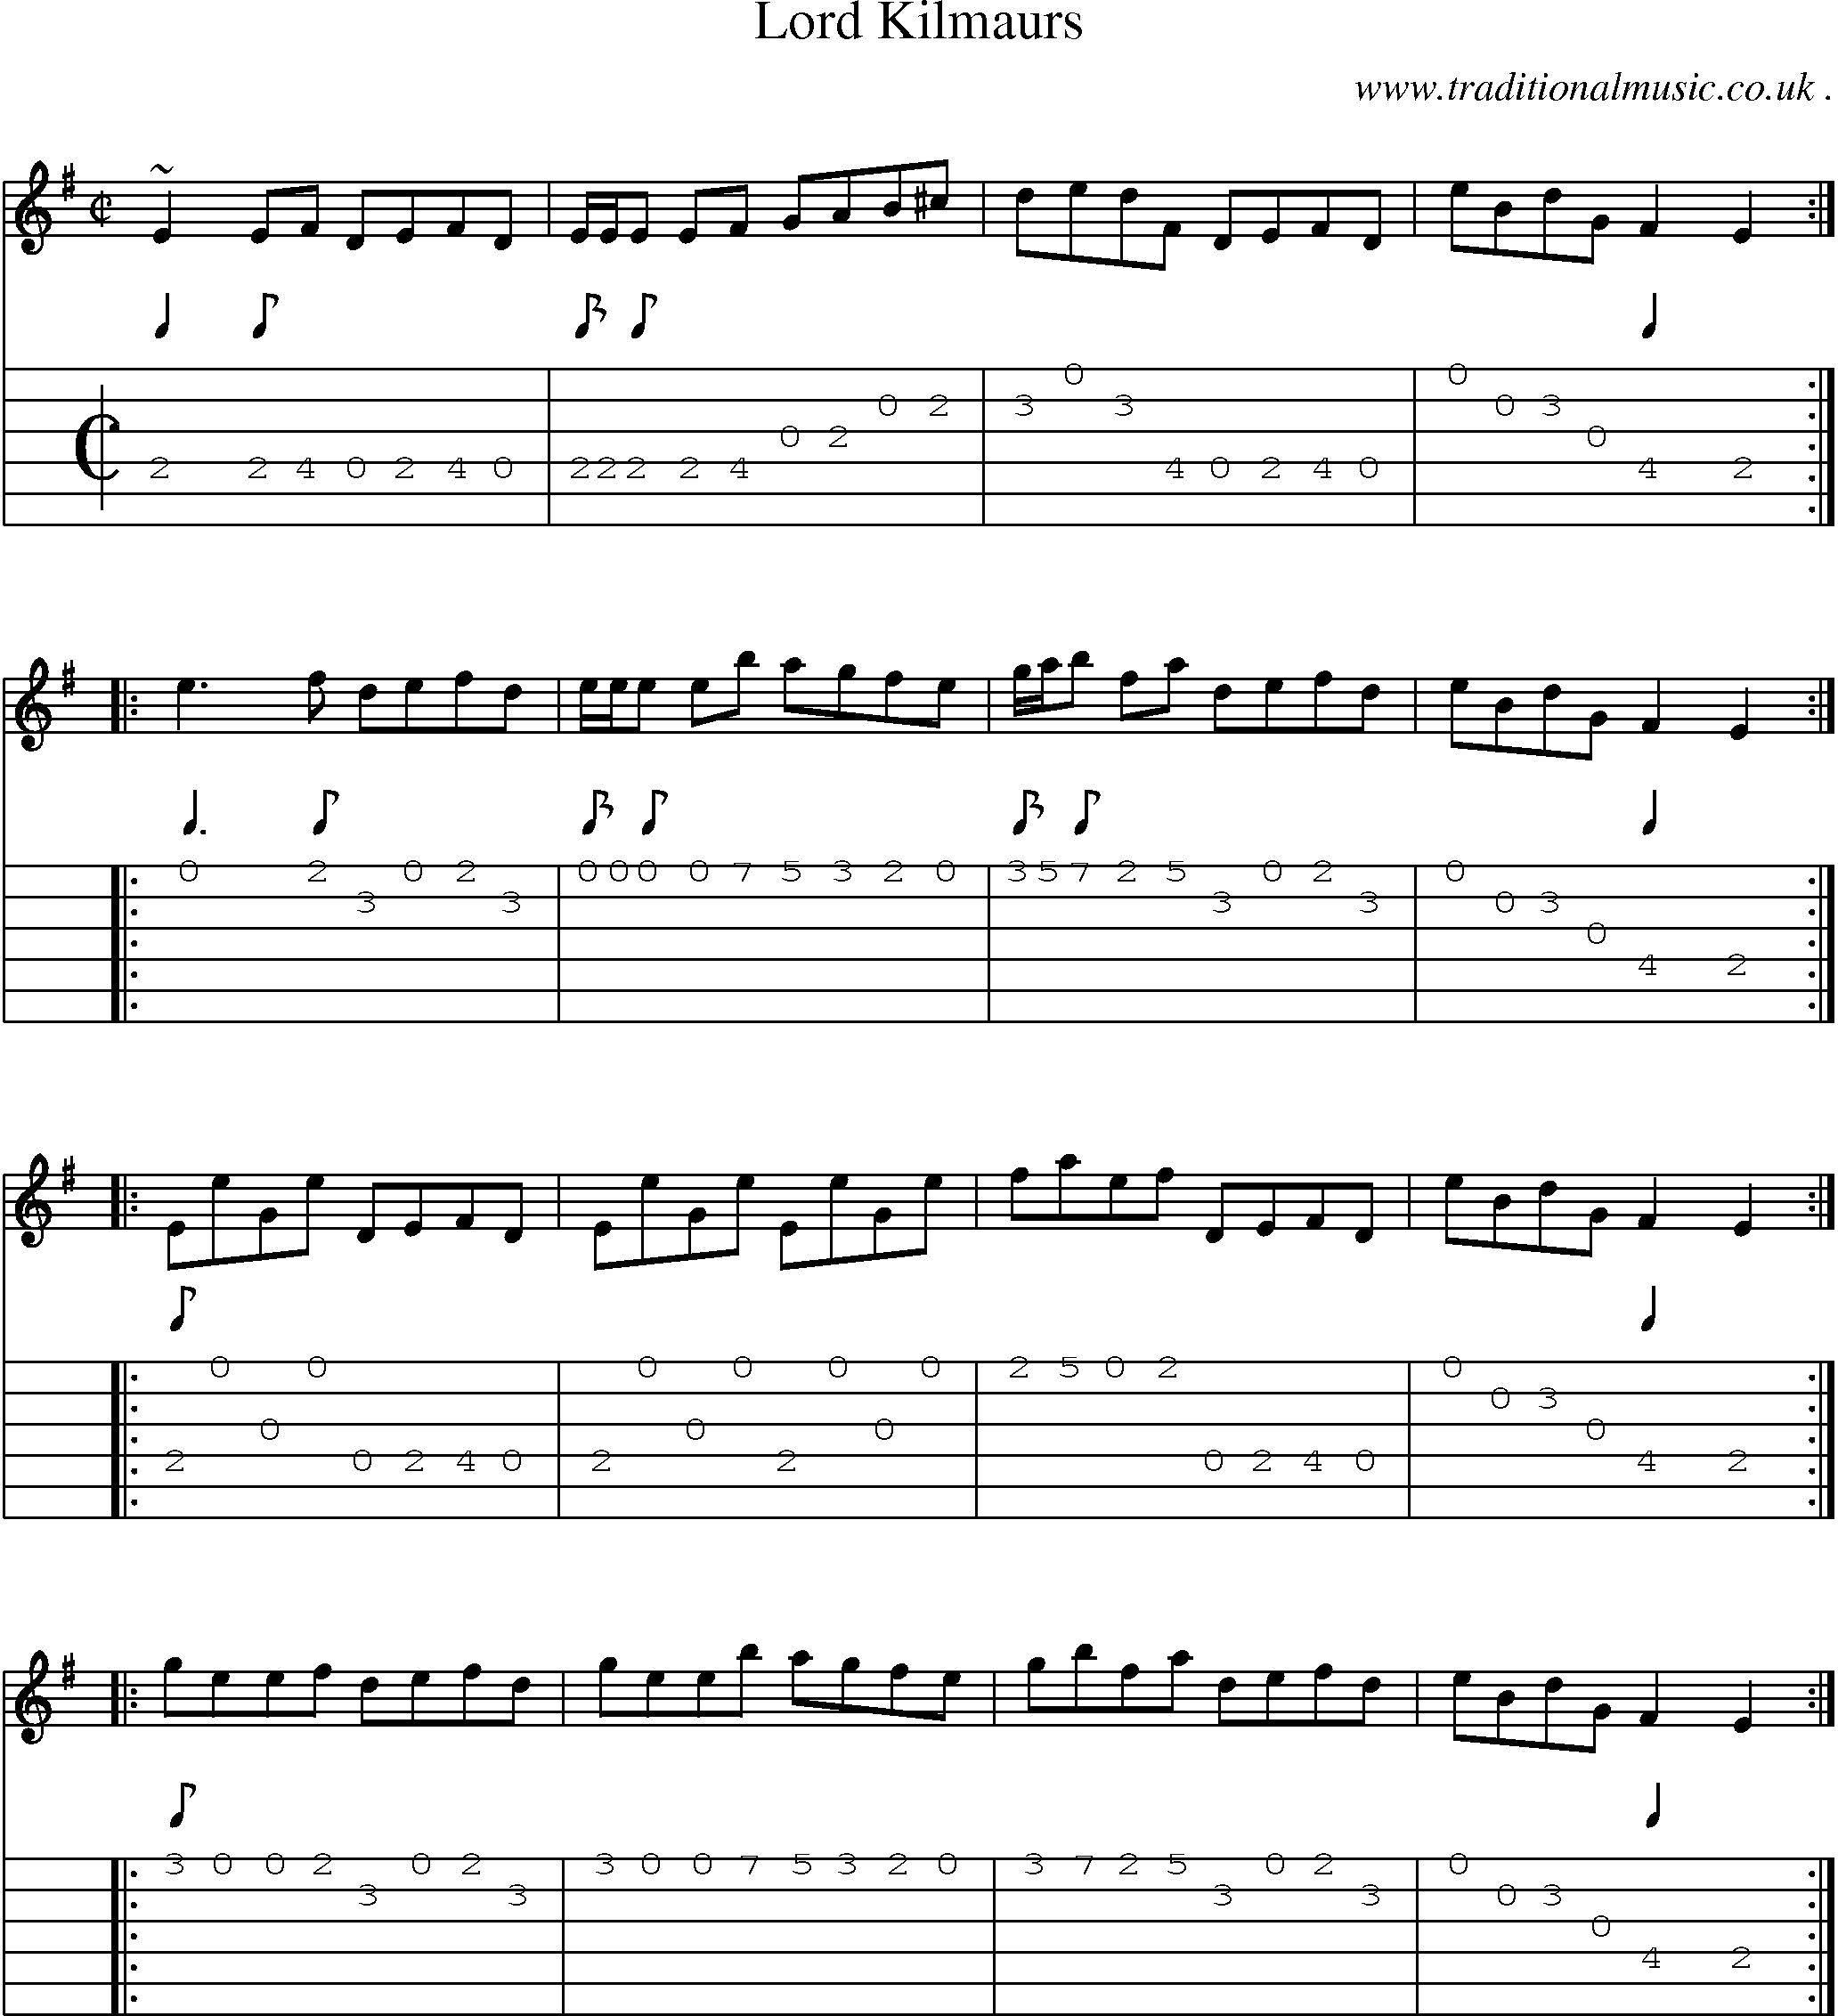 Sheet-music  score, Chords and Guitar Tabs for Lord Kilmaurs